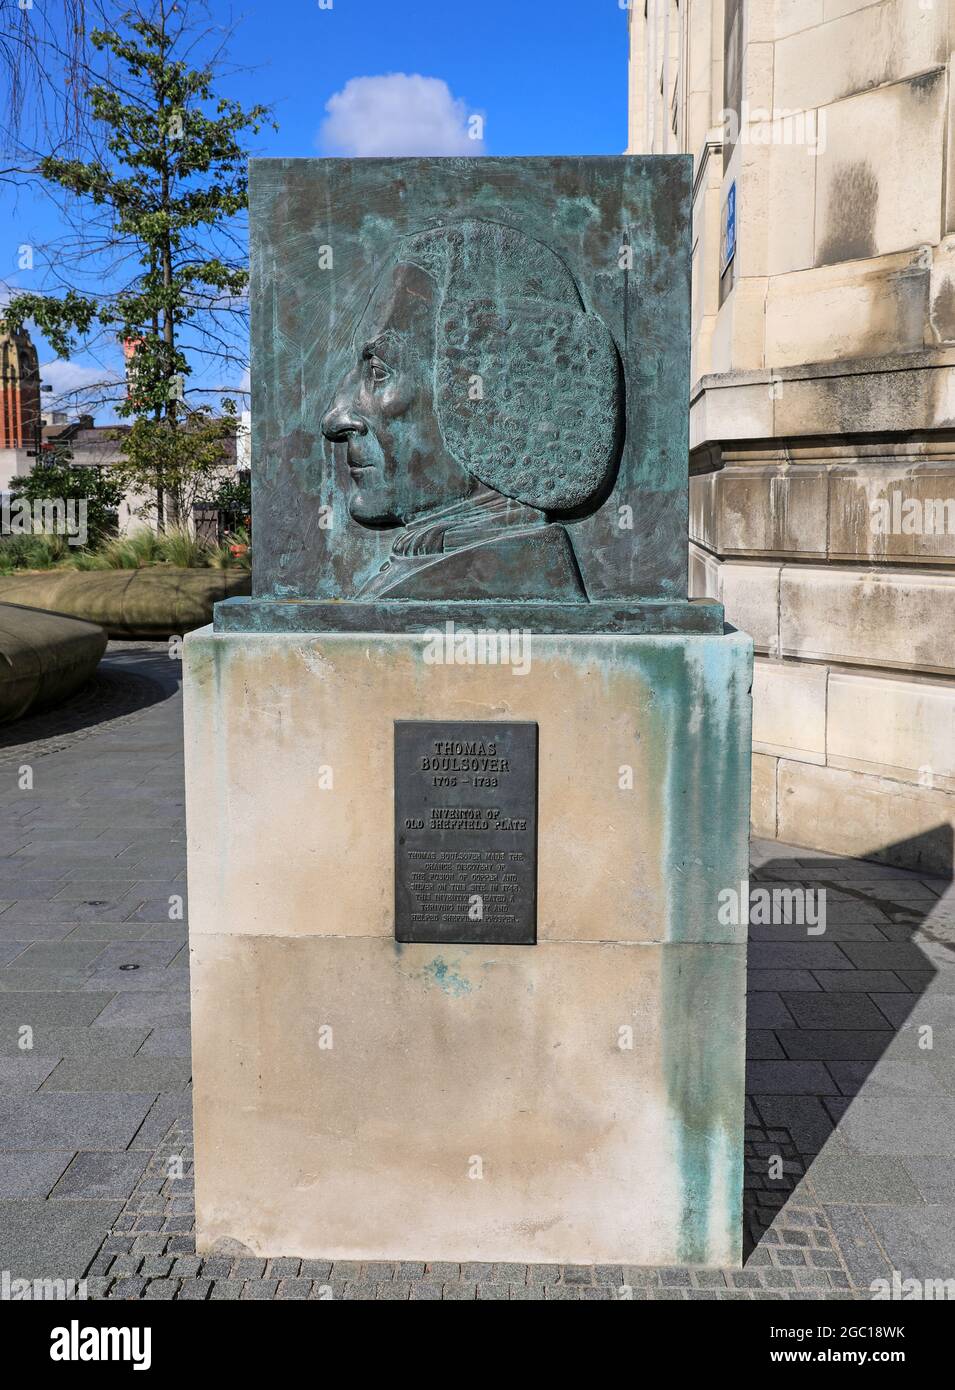 A memorial, statue or monument to Thomas Boulsover, the inventor of Sheffield Plate, Sheffield, South Yorkshire, England, UK Stock Photo